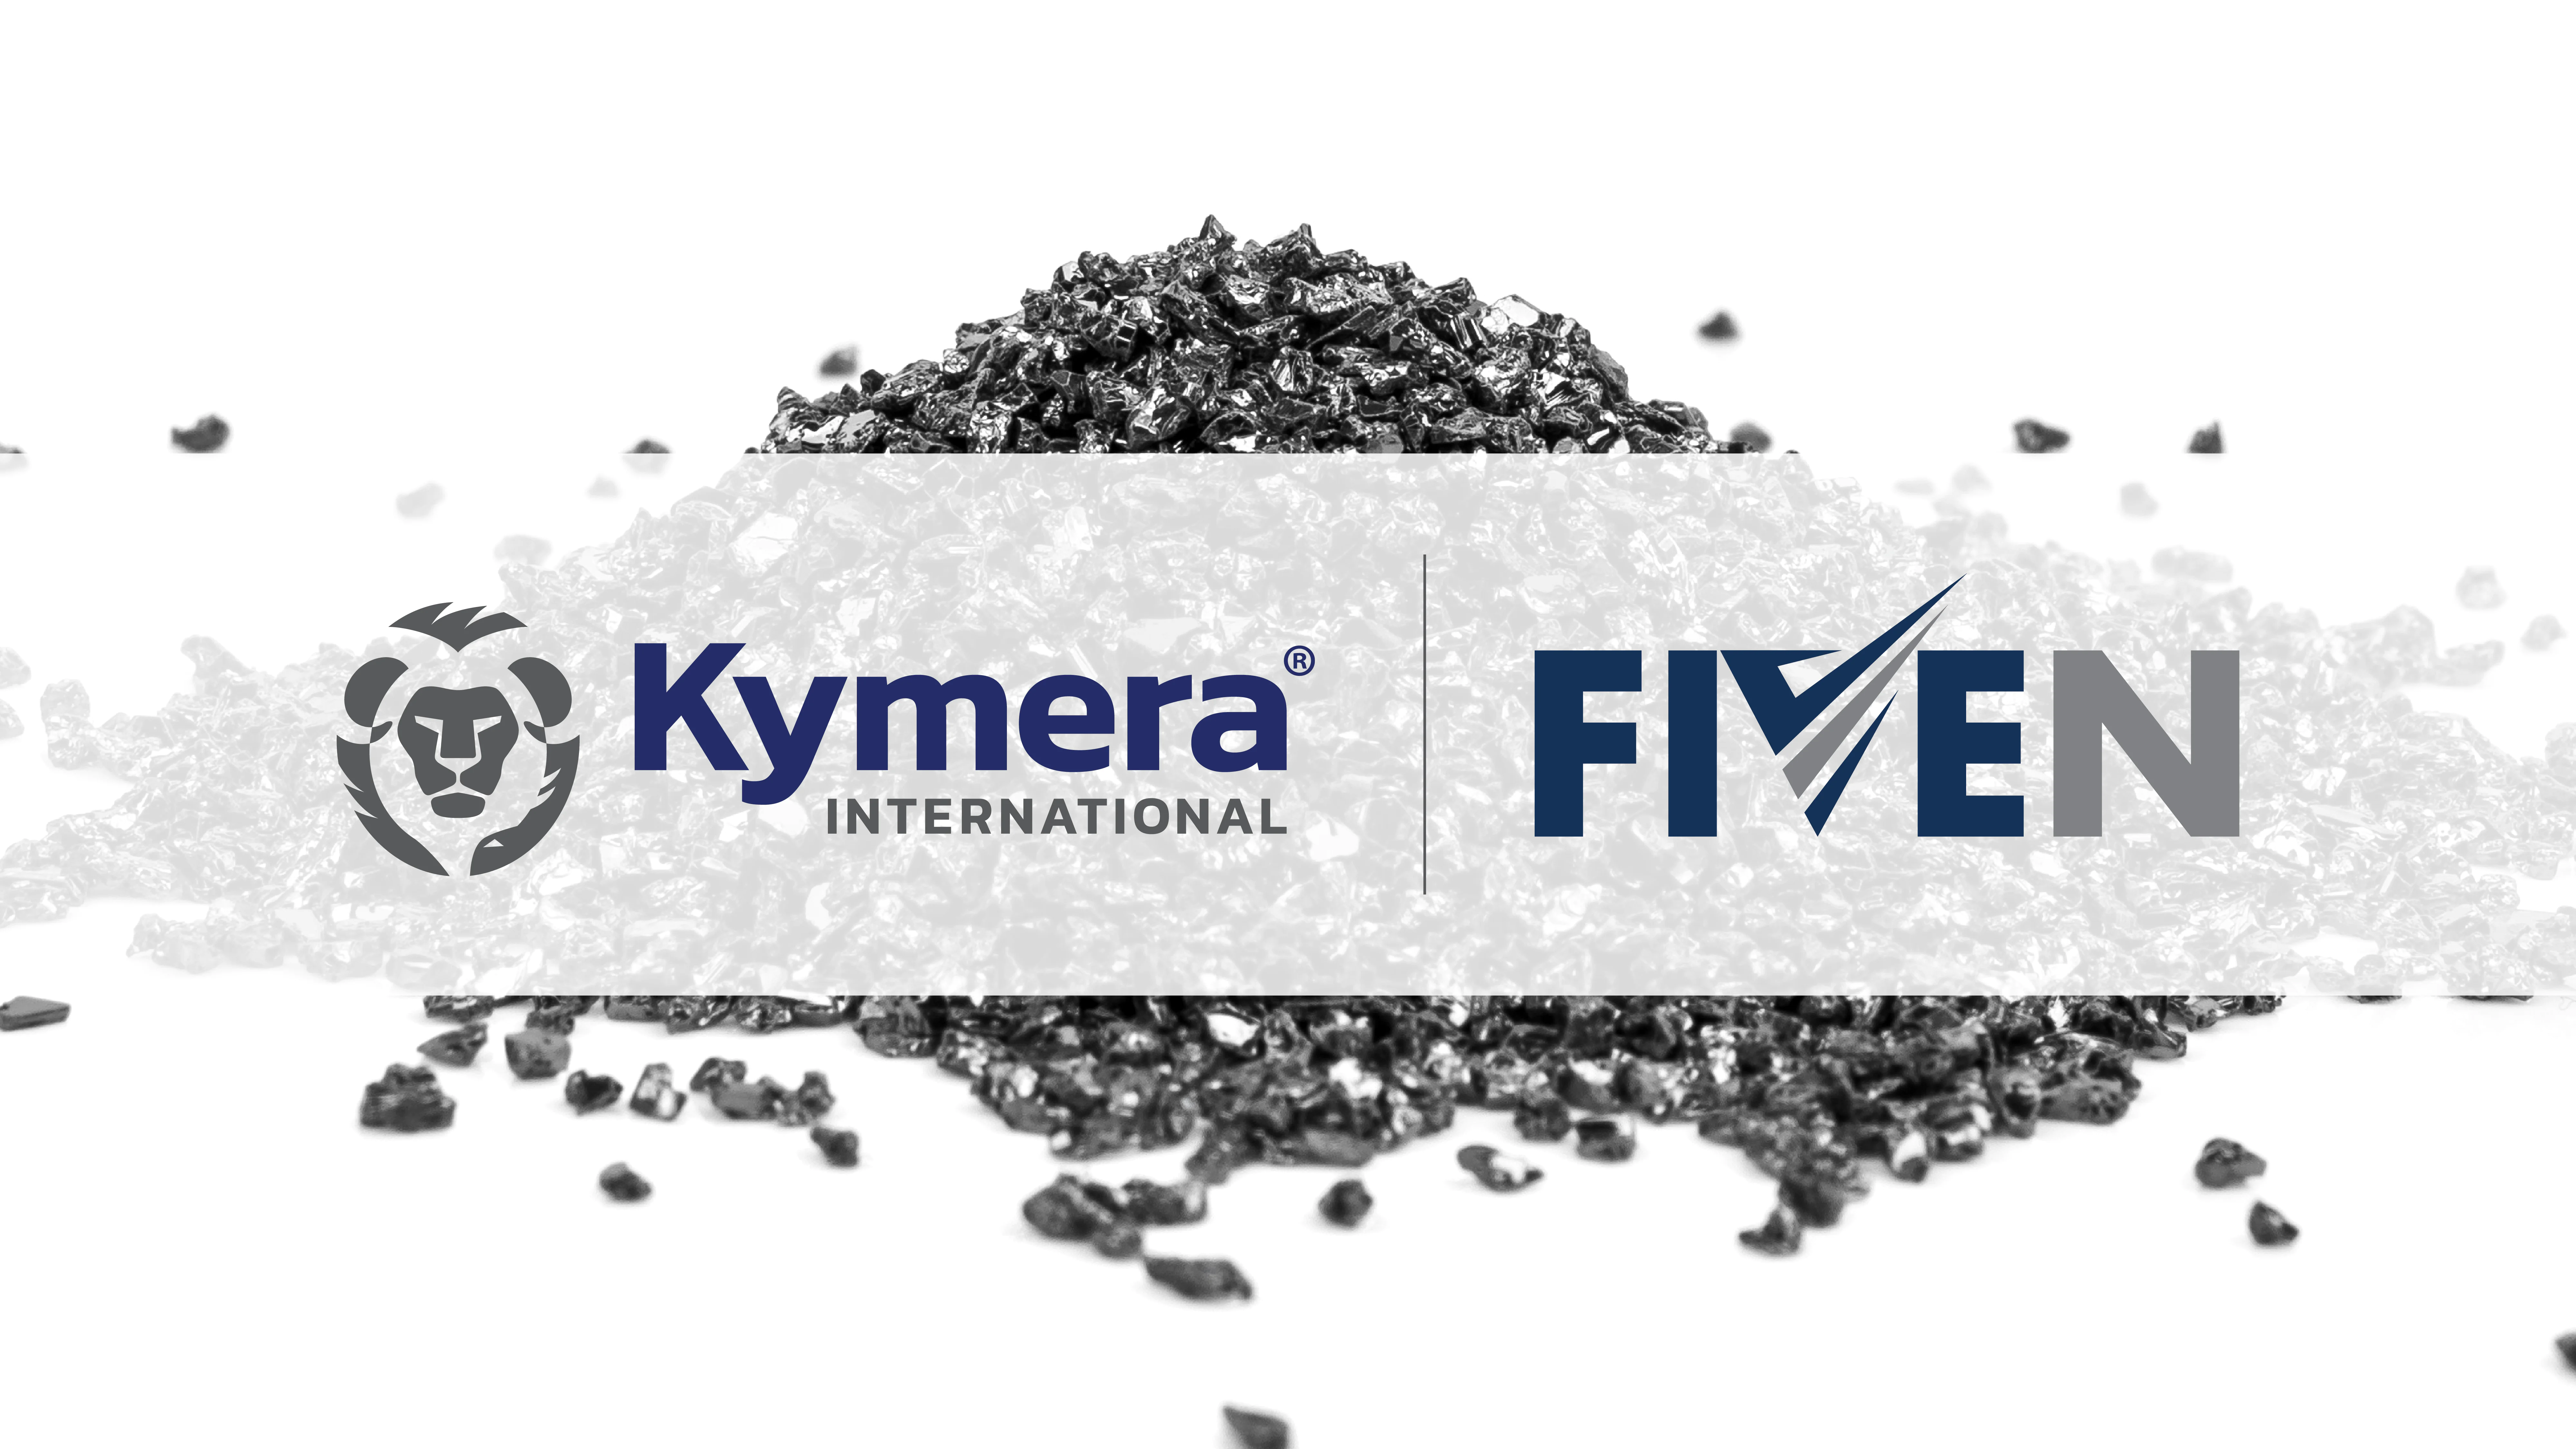 Kymera International Signs Deal to Acquire Fiven ASA